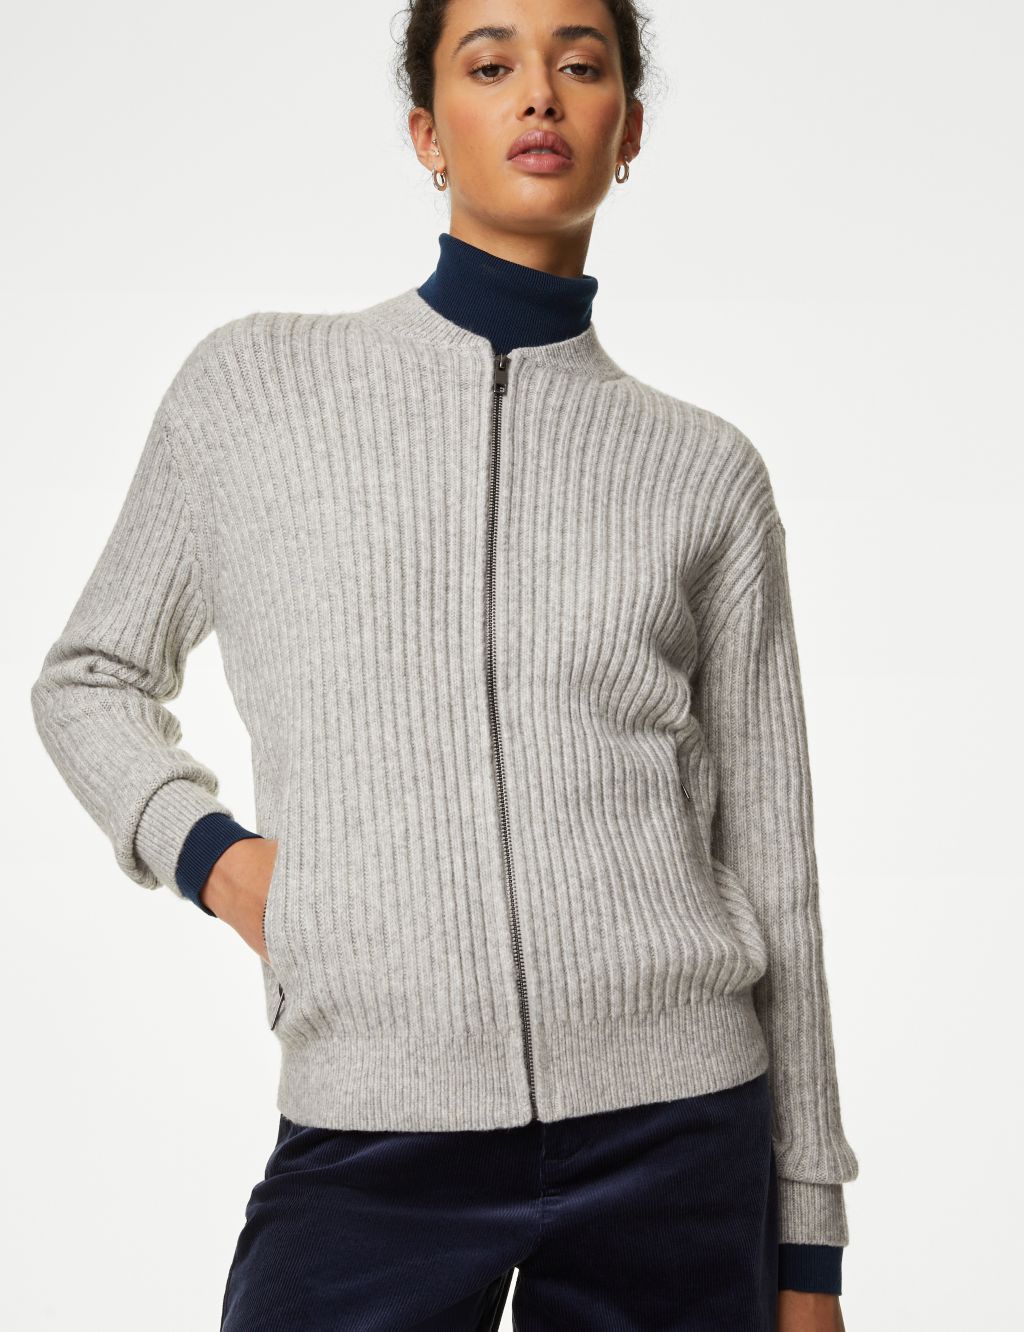 Knitted Ribbed Crew Neck Cardigan image 4